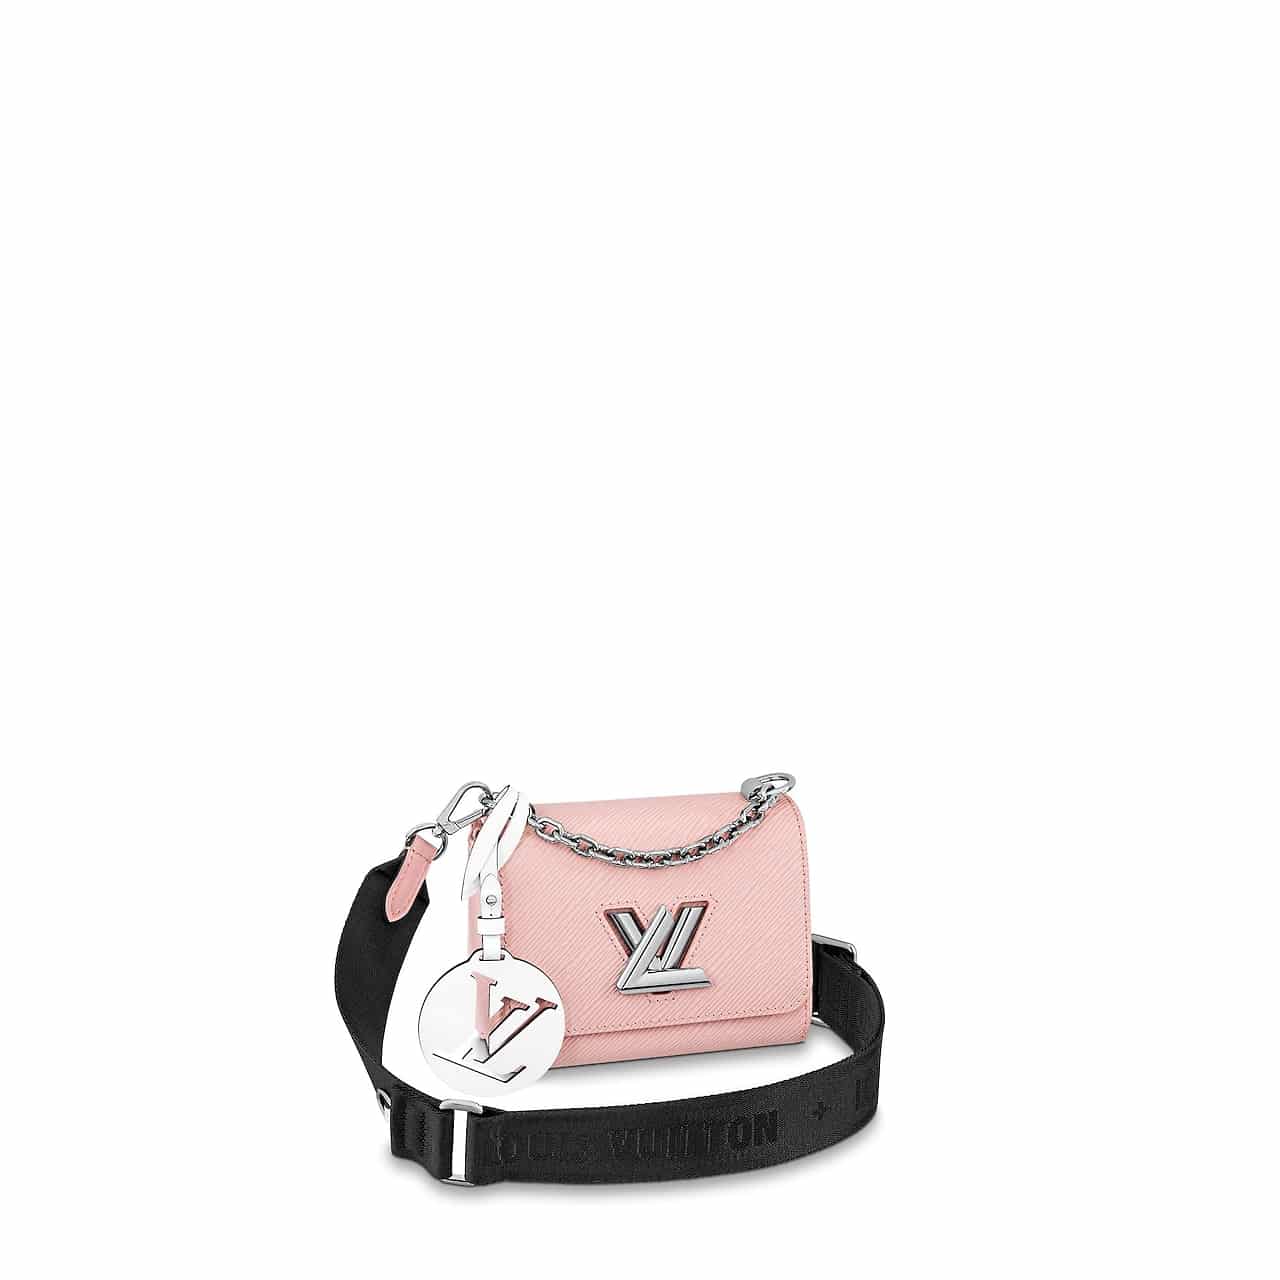 Louis Vuitton unveils all new “Horizon” soft luggage collection